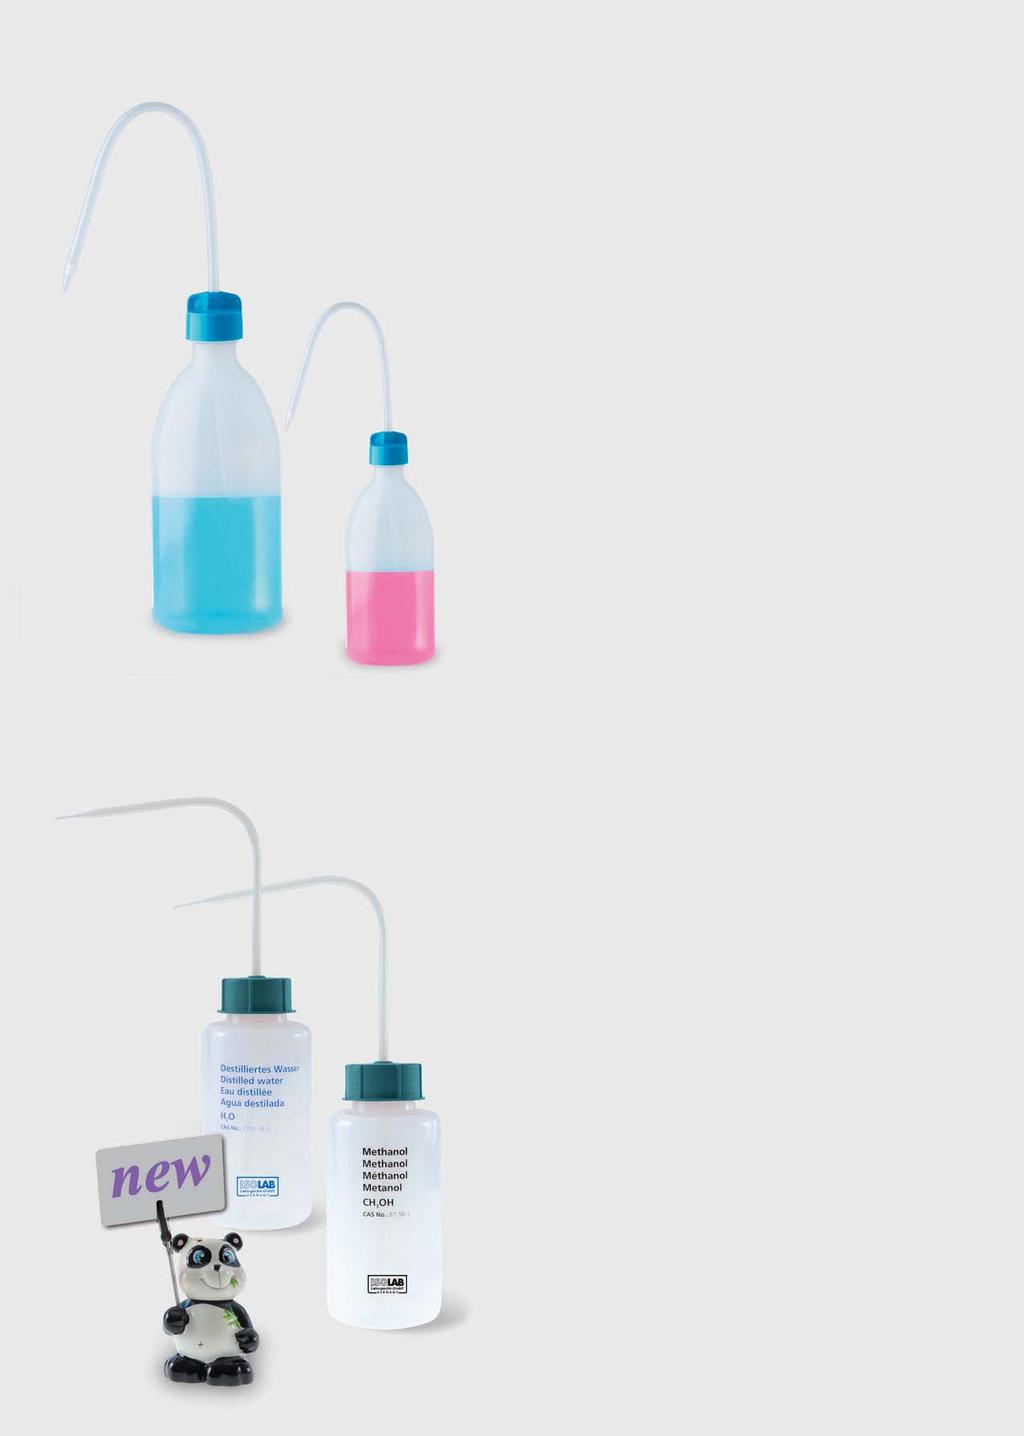 analytical laboratory 99 wash Manufactured from low density polyethylene. They are semi-rigid, translucent, have excellent clarity and easy to use by pressing gently.